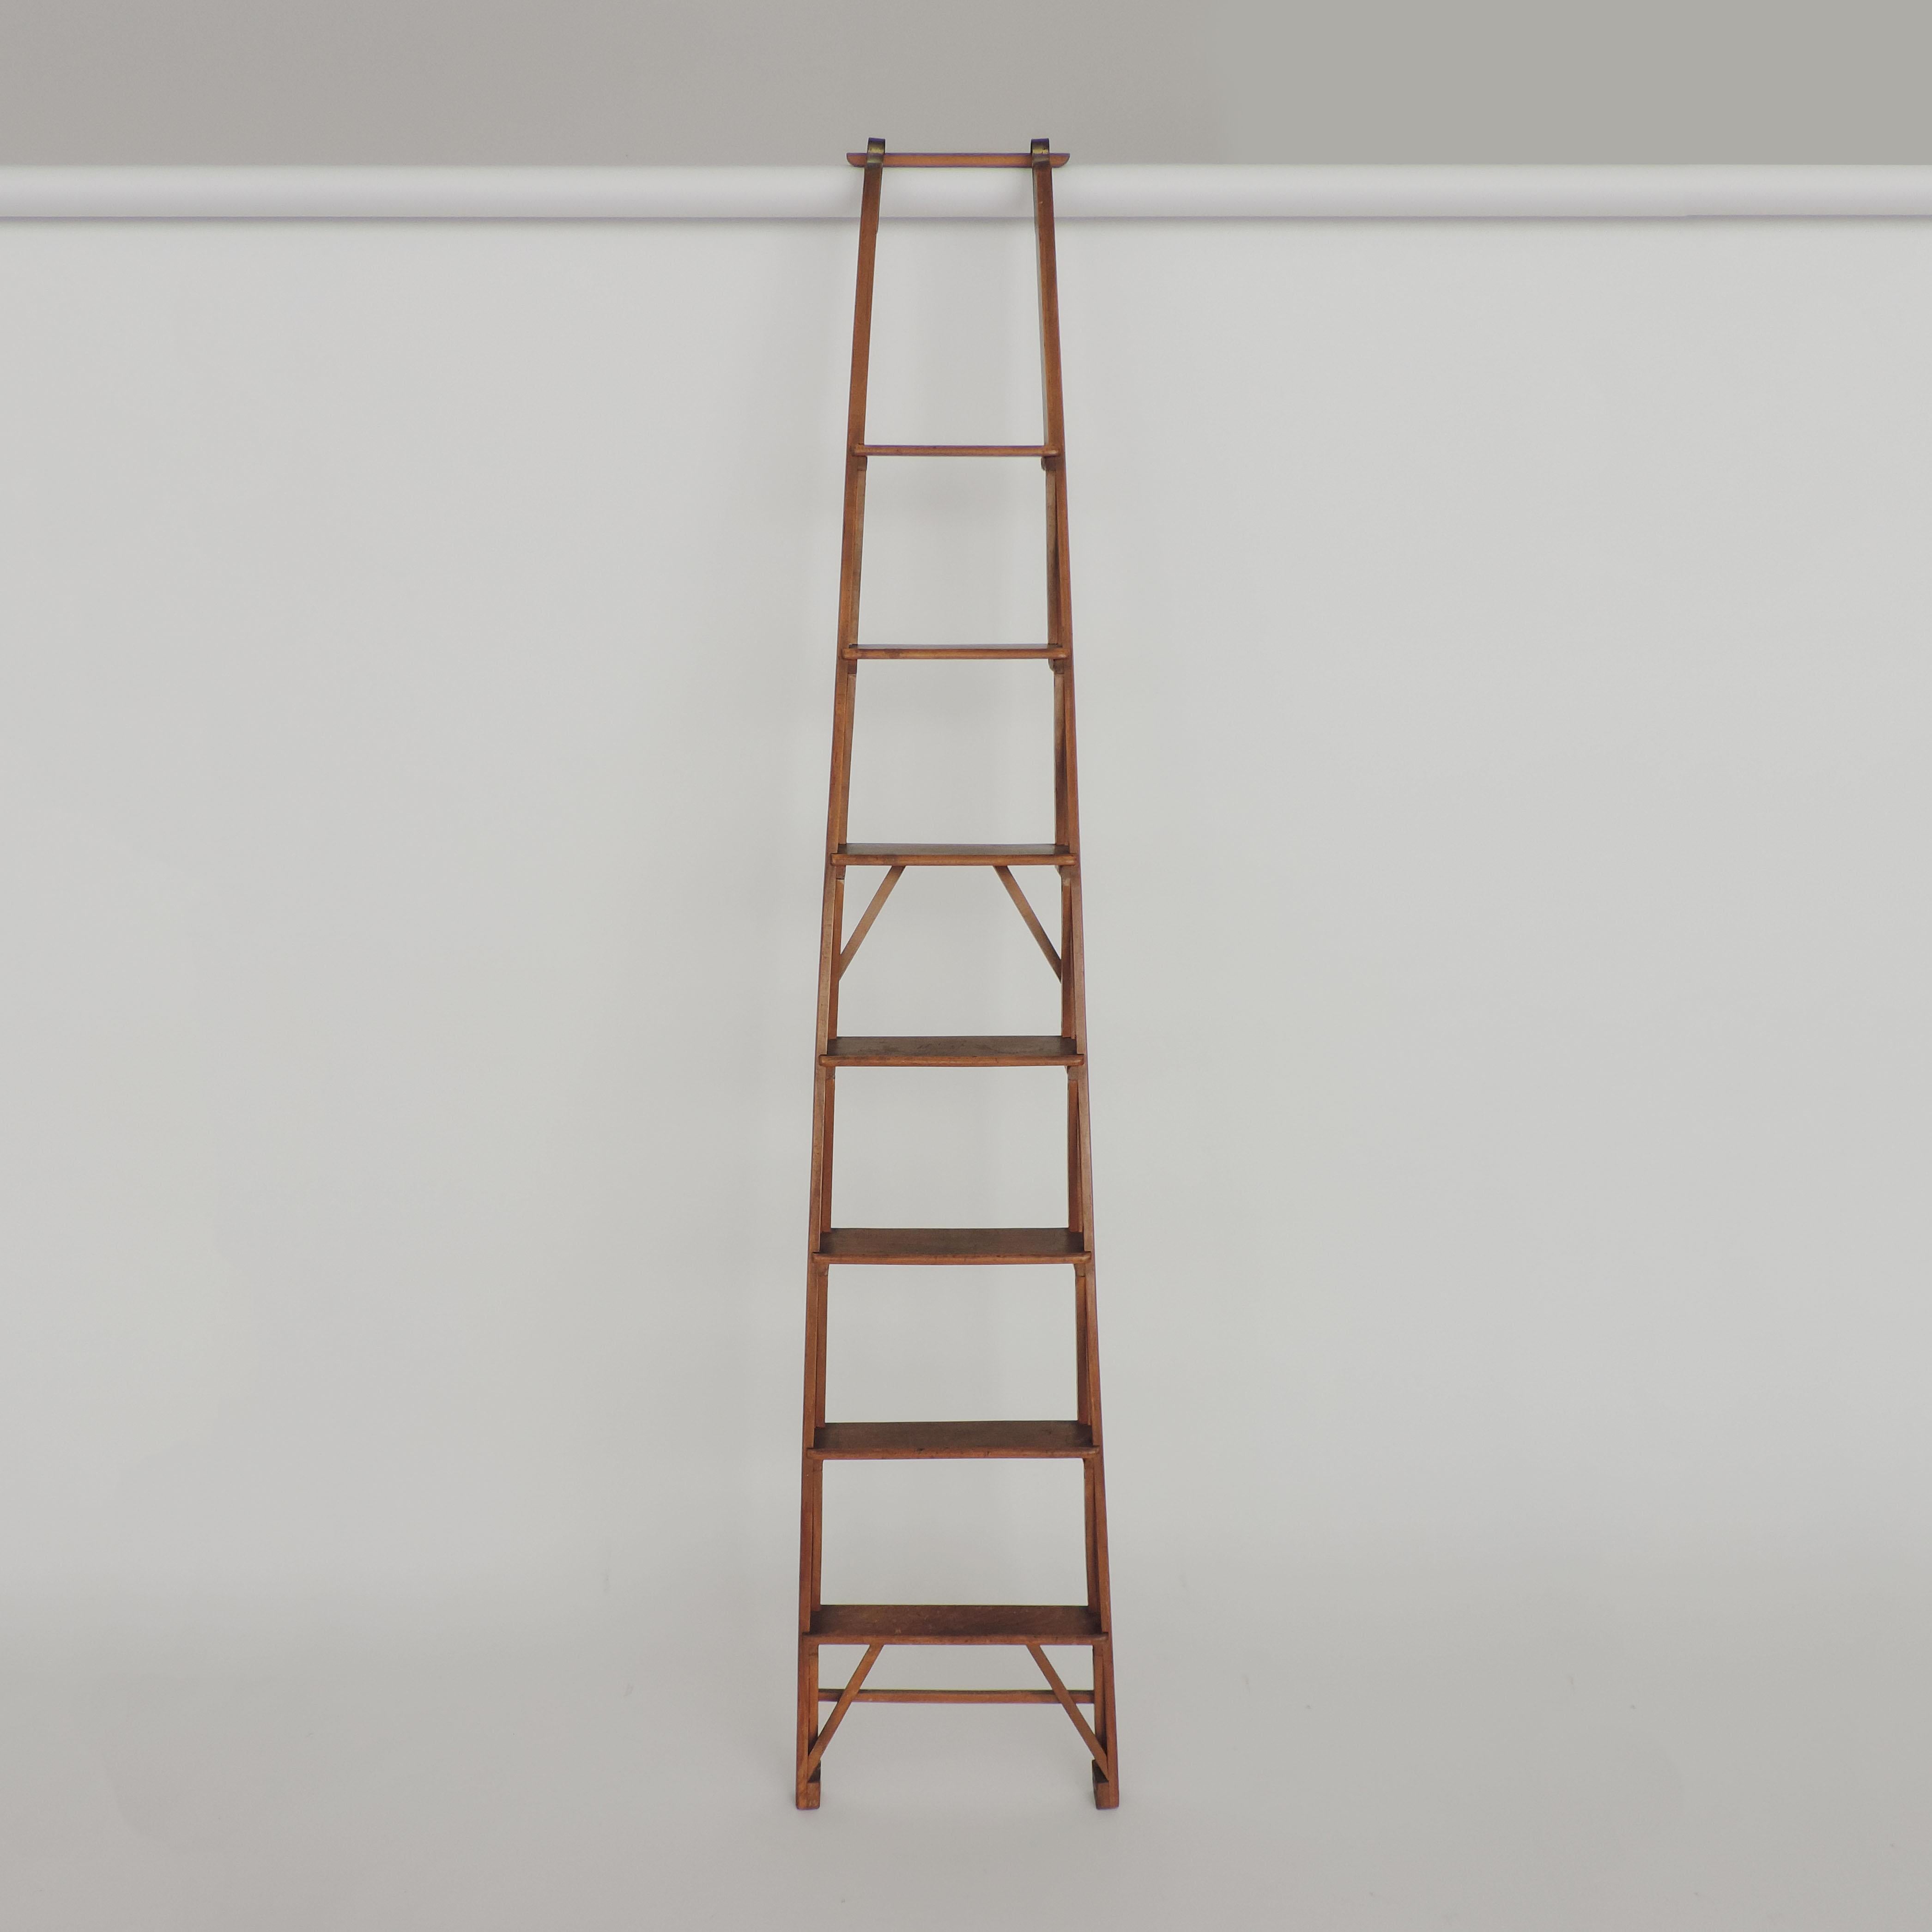 Italian Architectural library ladder 
Attributed to Franco Albini, 1950s.
 